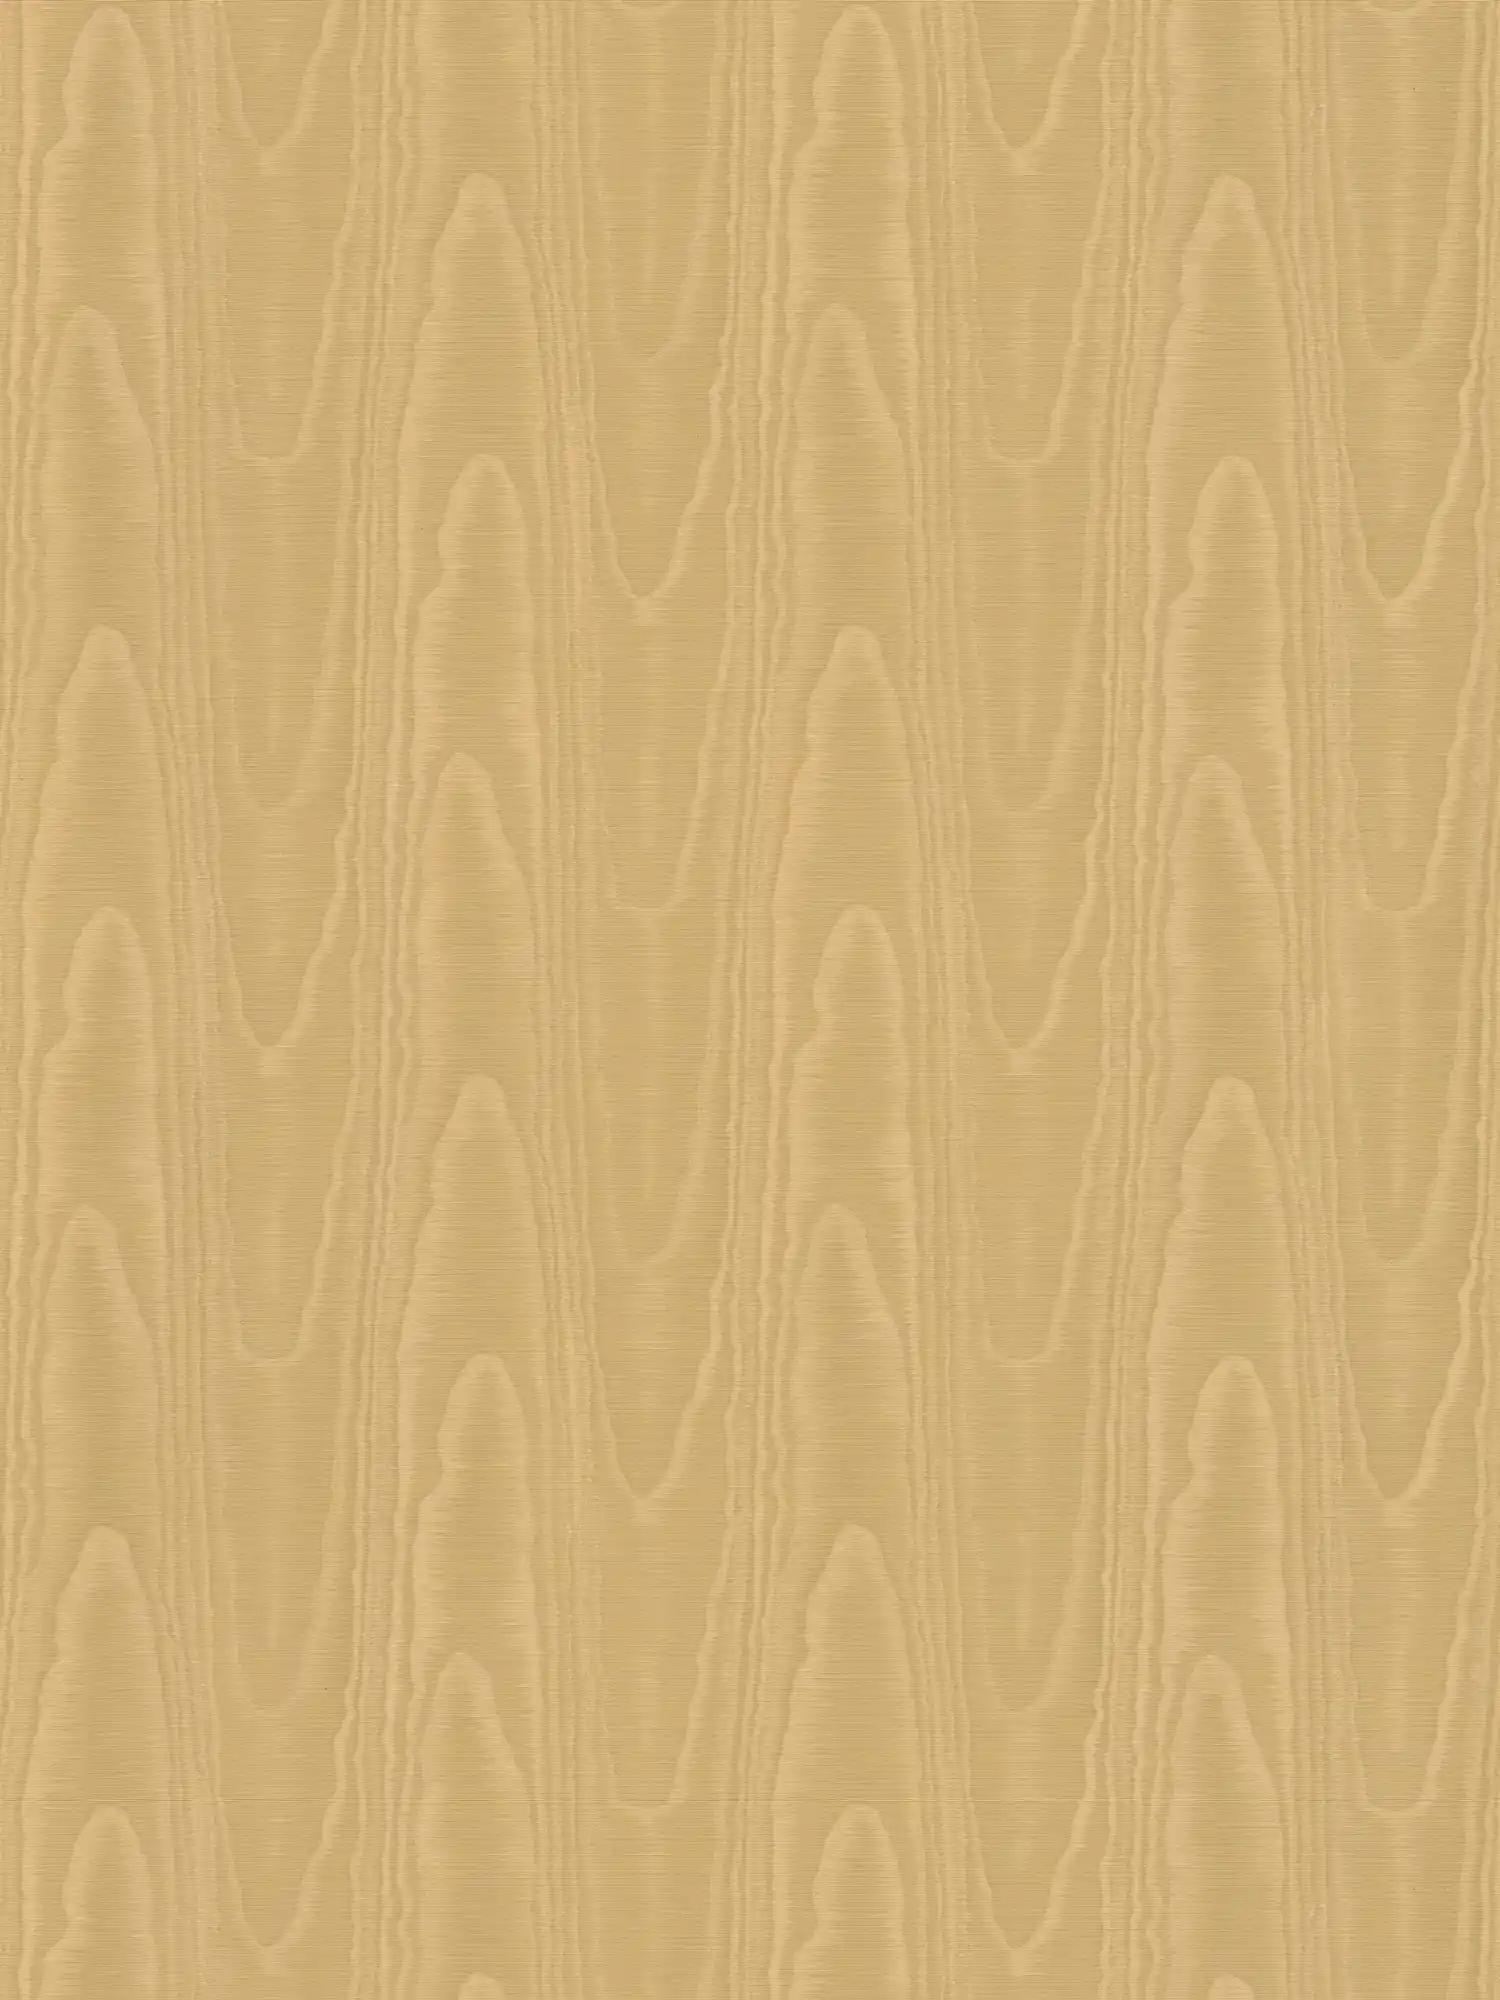 Textile-look wallpaper with silk moiré effect - brown, yellow
